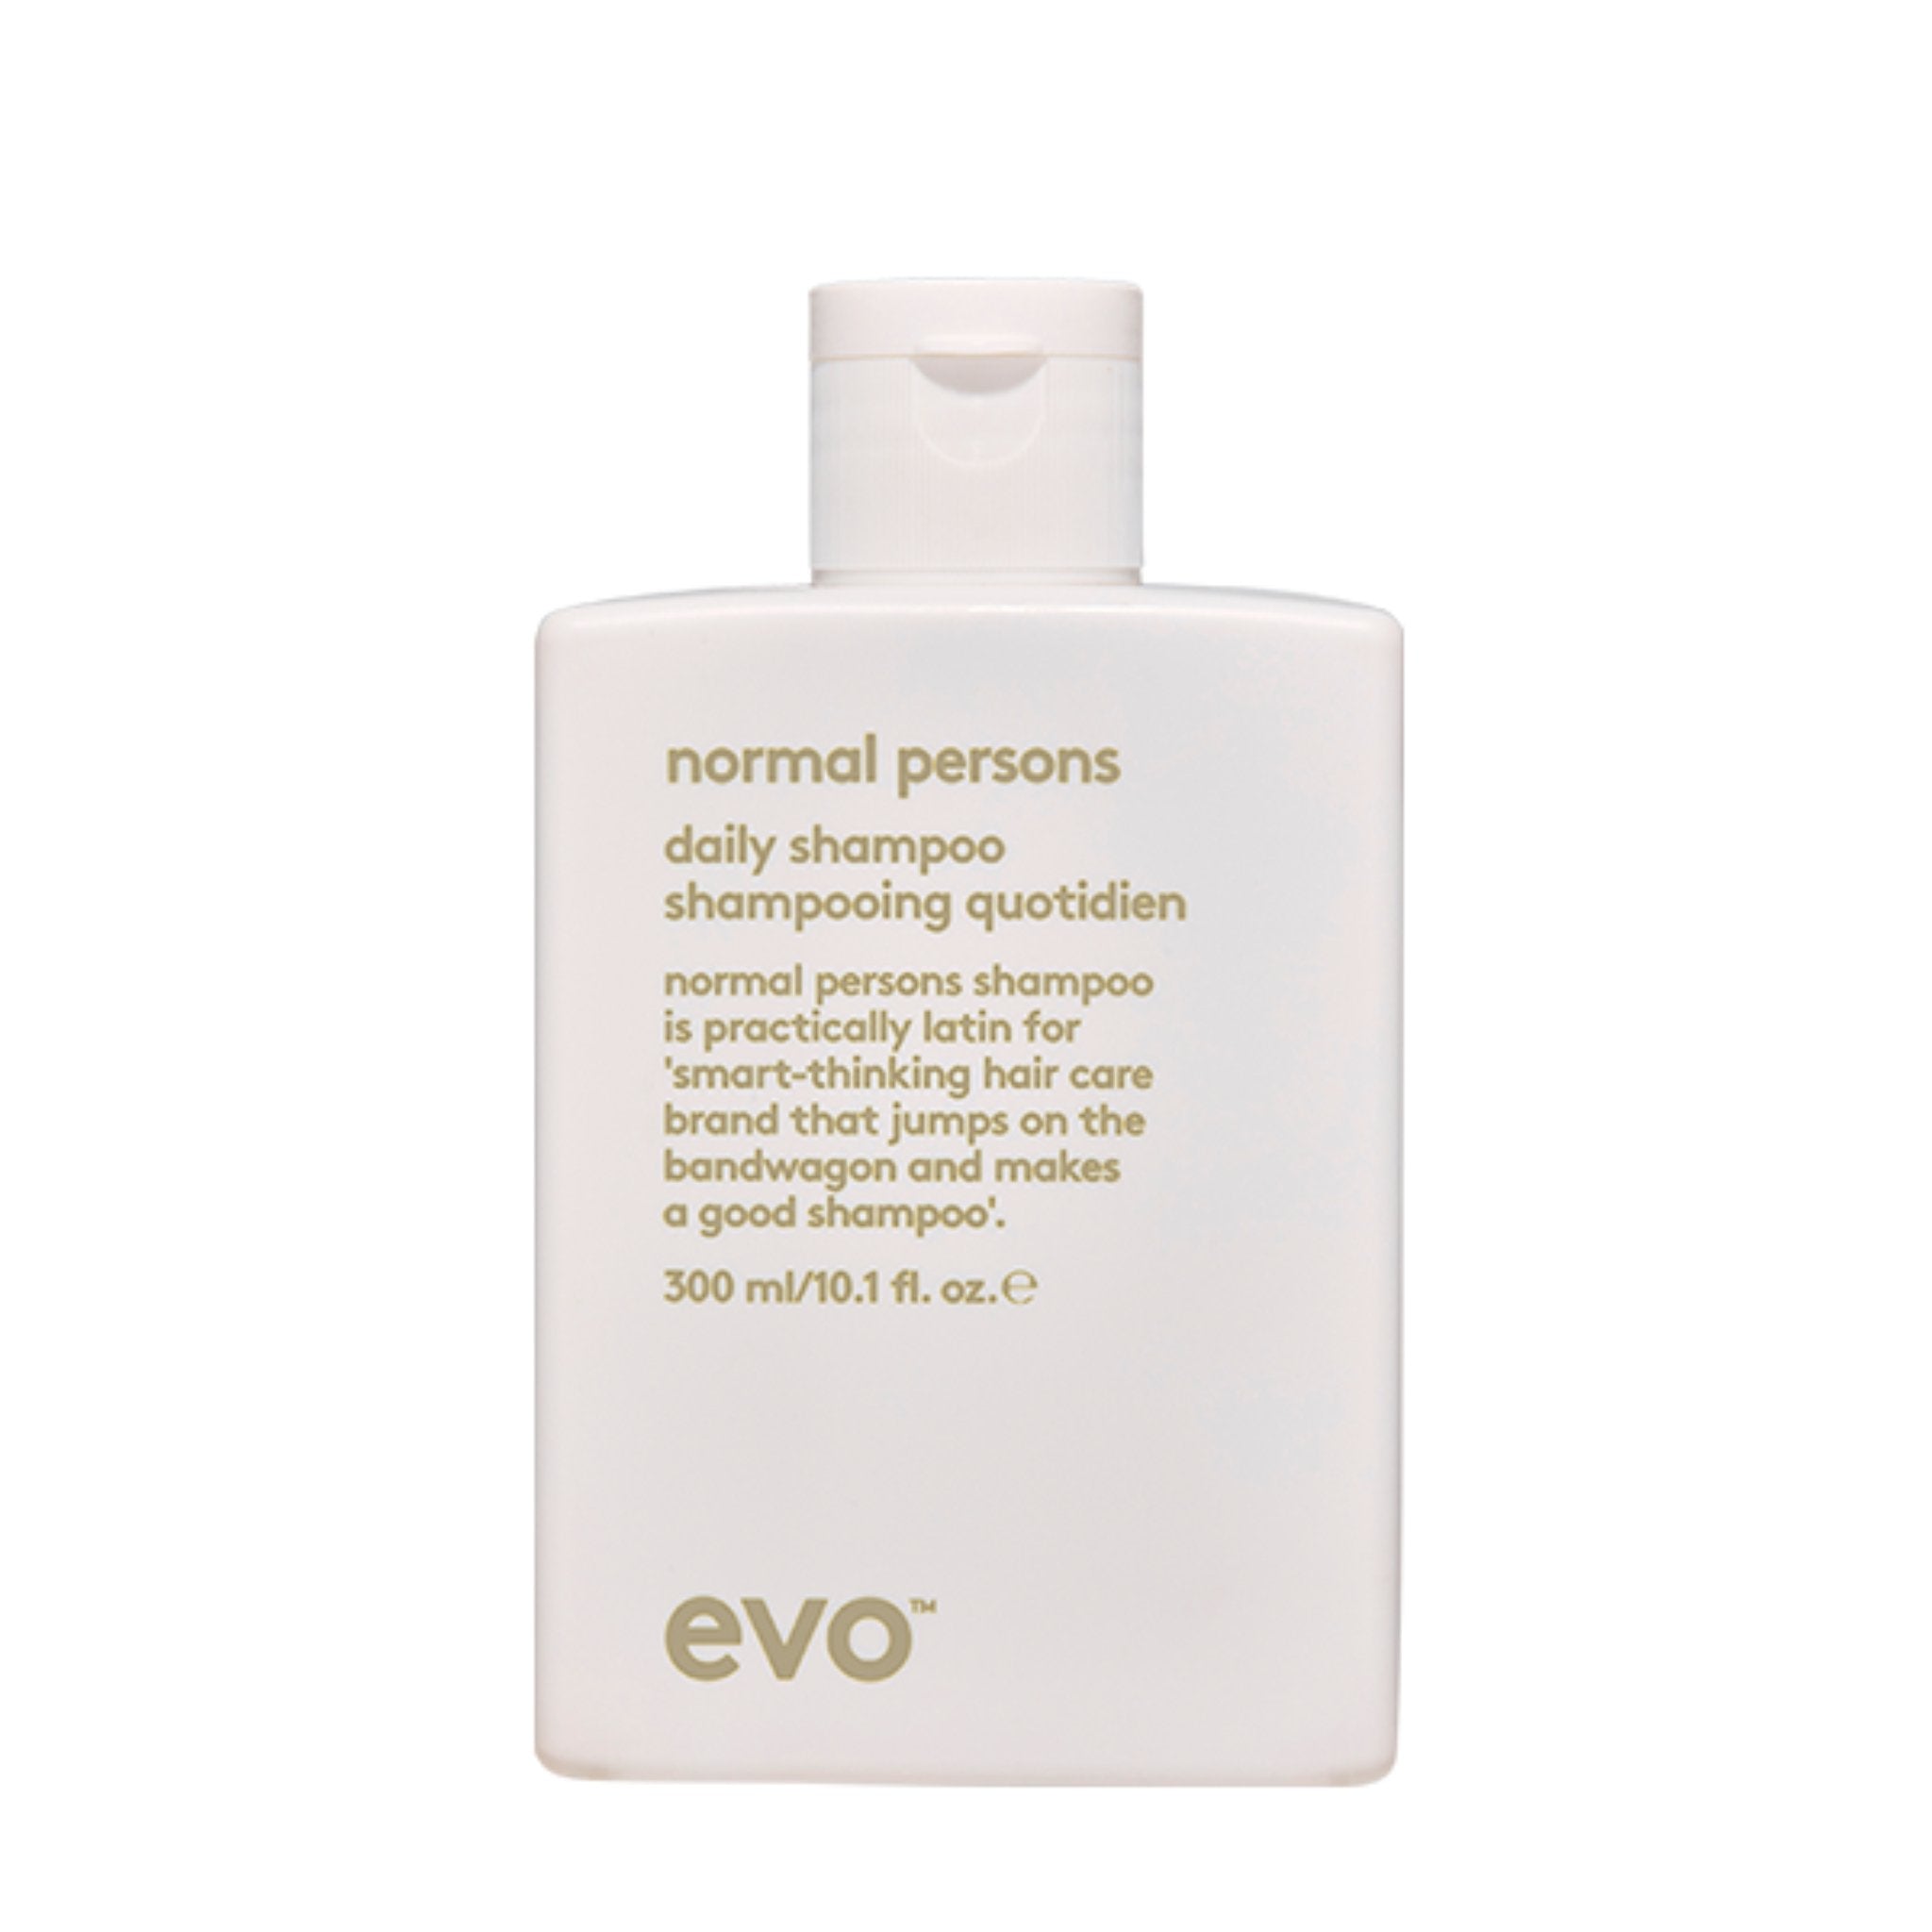 Evo. Normal Persons Shampoing Quotidien - 300 ml - Concept C. Shop